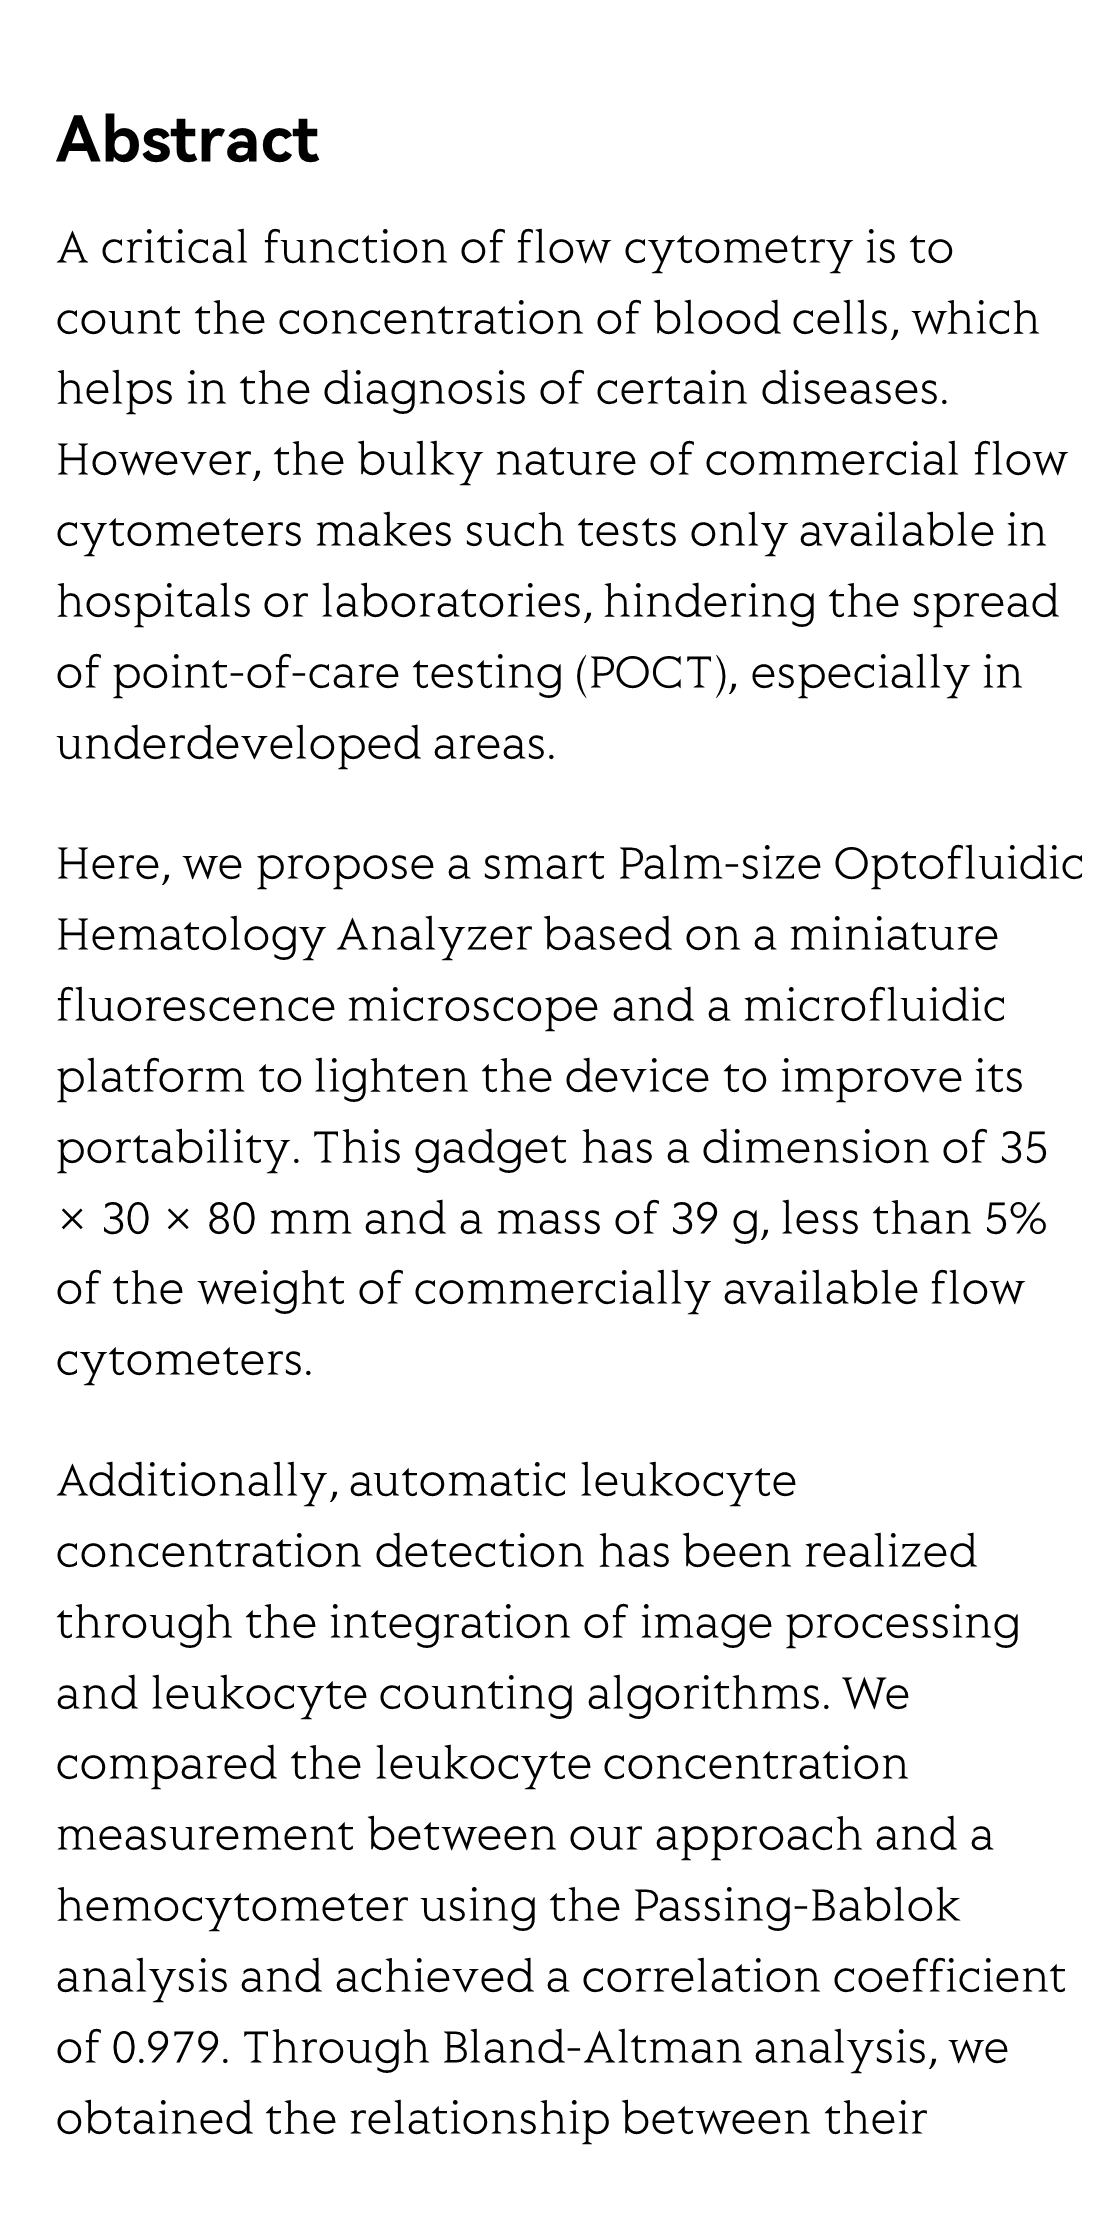 Smart palm-size optofluidic hematology analyzer for automated imaging-based leukocyte concentration detection_2